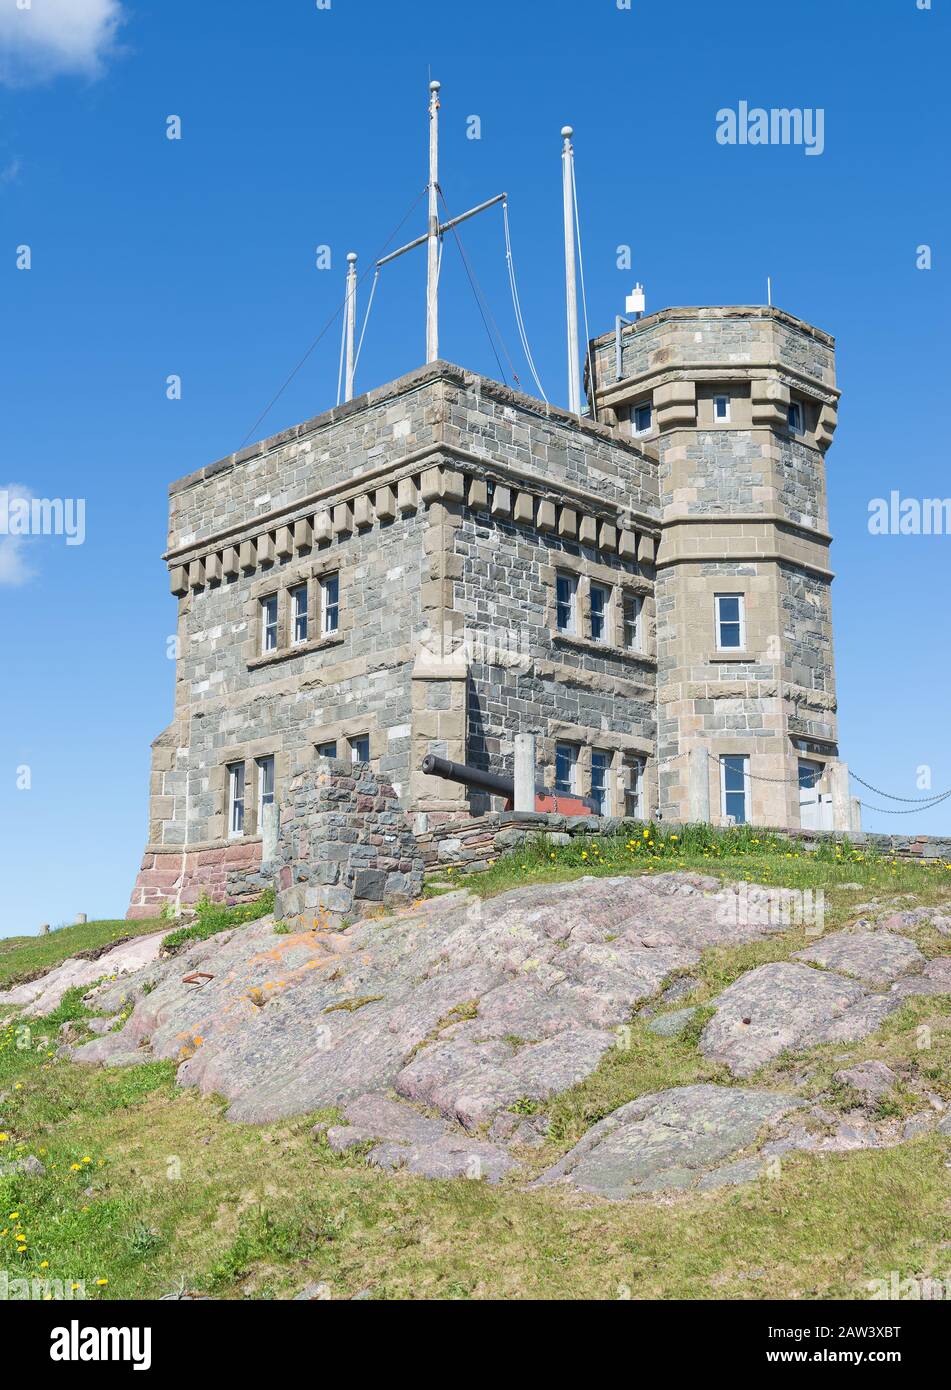 Cabot Tower on Signal Hill in St. John's, Newfoundland and Labrador. This is where Marconi received the first trans-Atlantic human voice transmission. Stock Photo